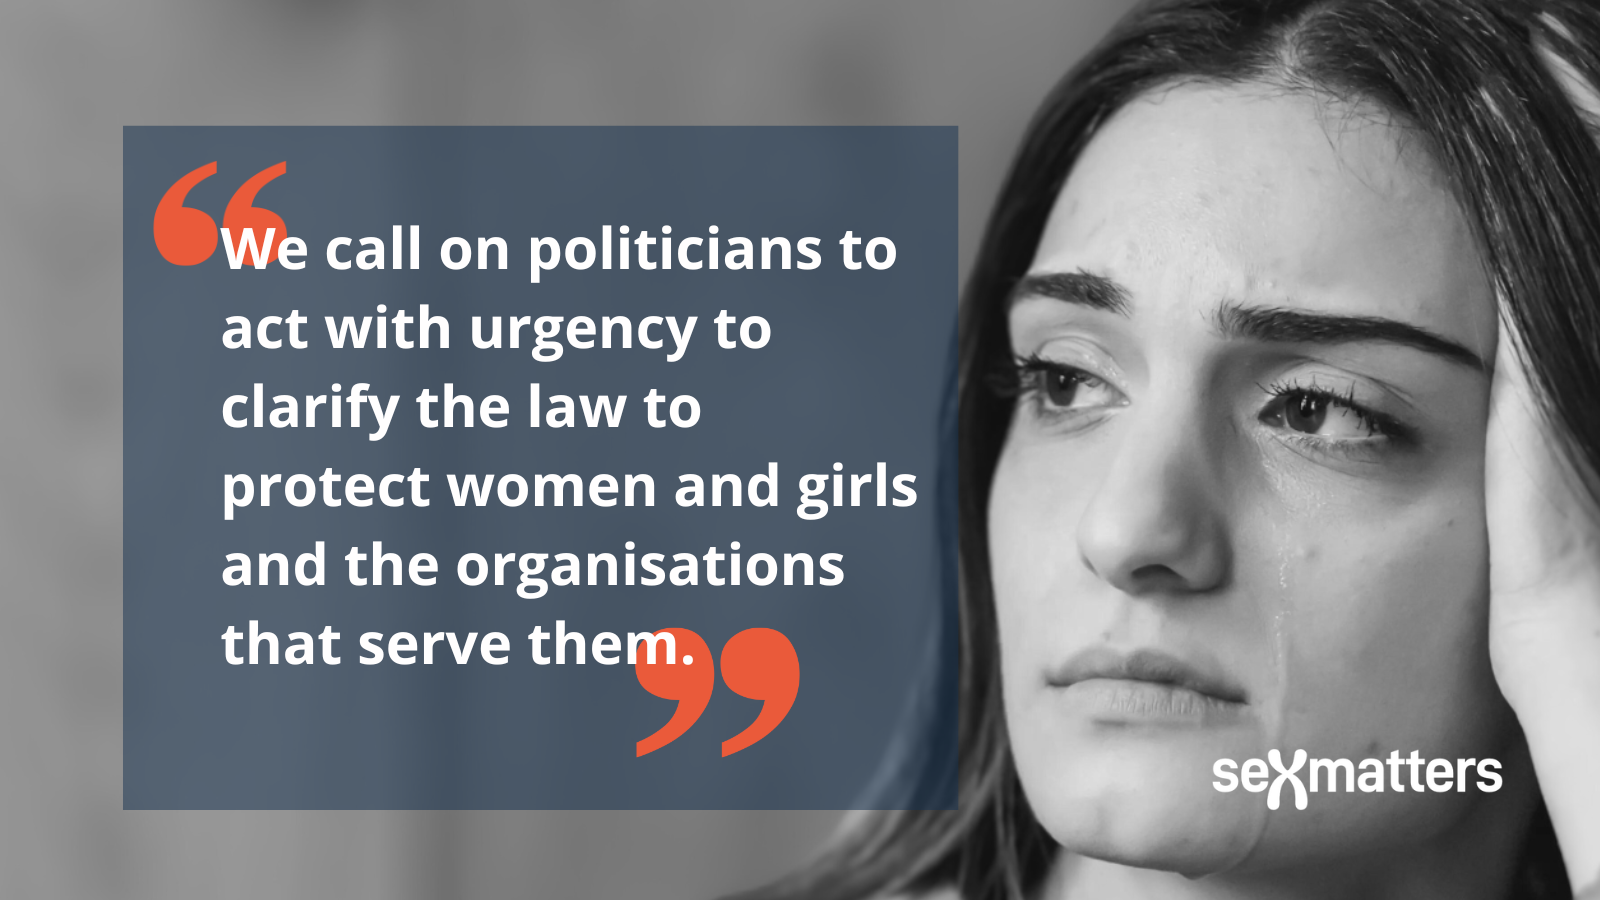 We call on politicians to act with urgency to clarify the law to protect women and girls and the organisations that serve them.